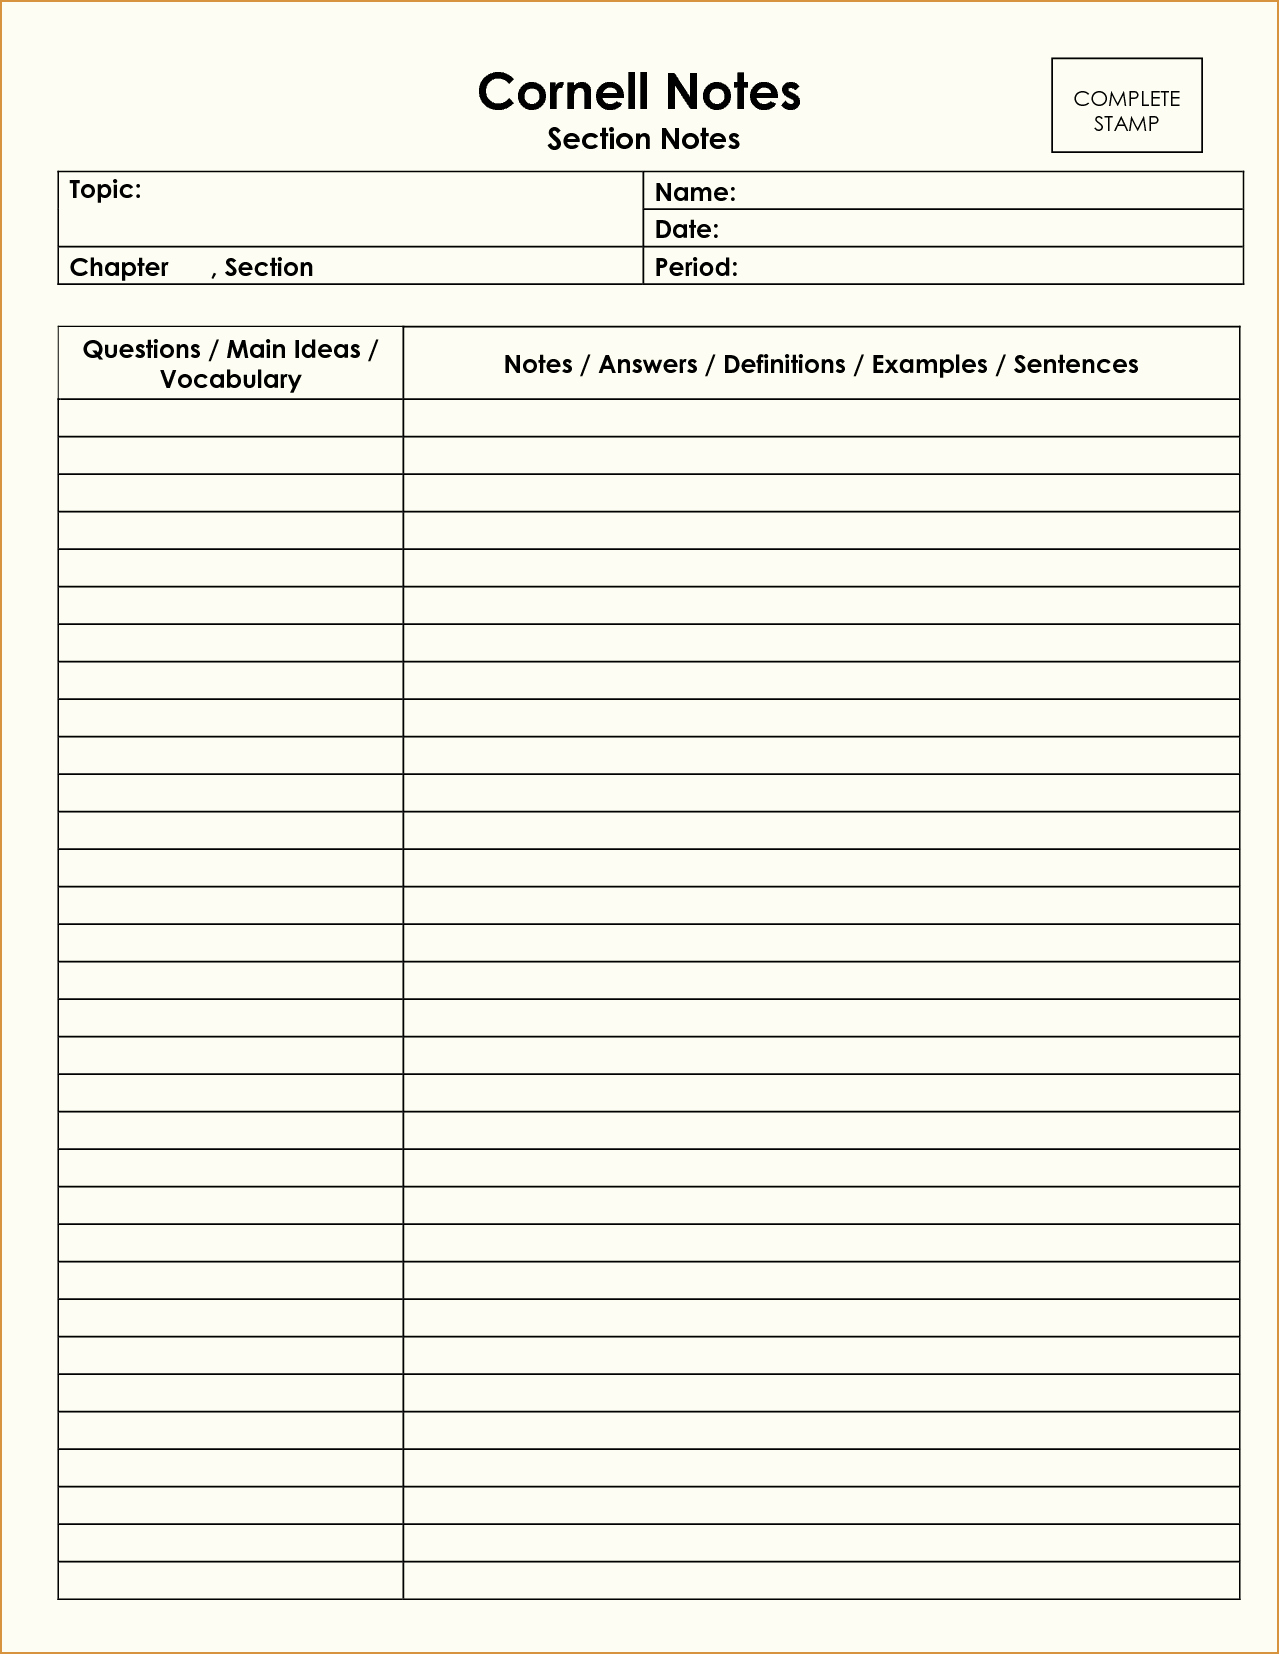 Cornell Note Template Word Luxury Cornell Notes Template Word Doc Enote